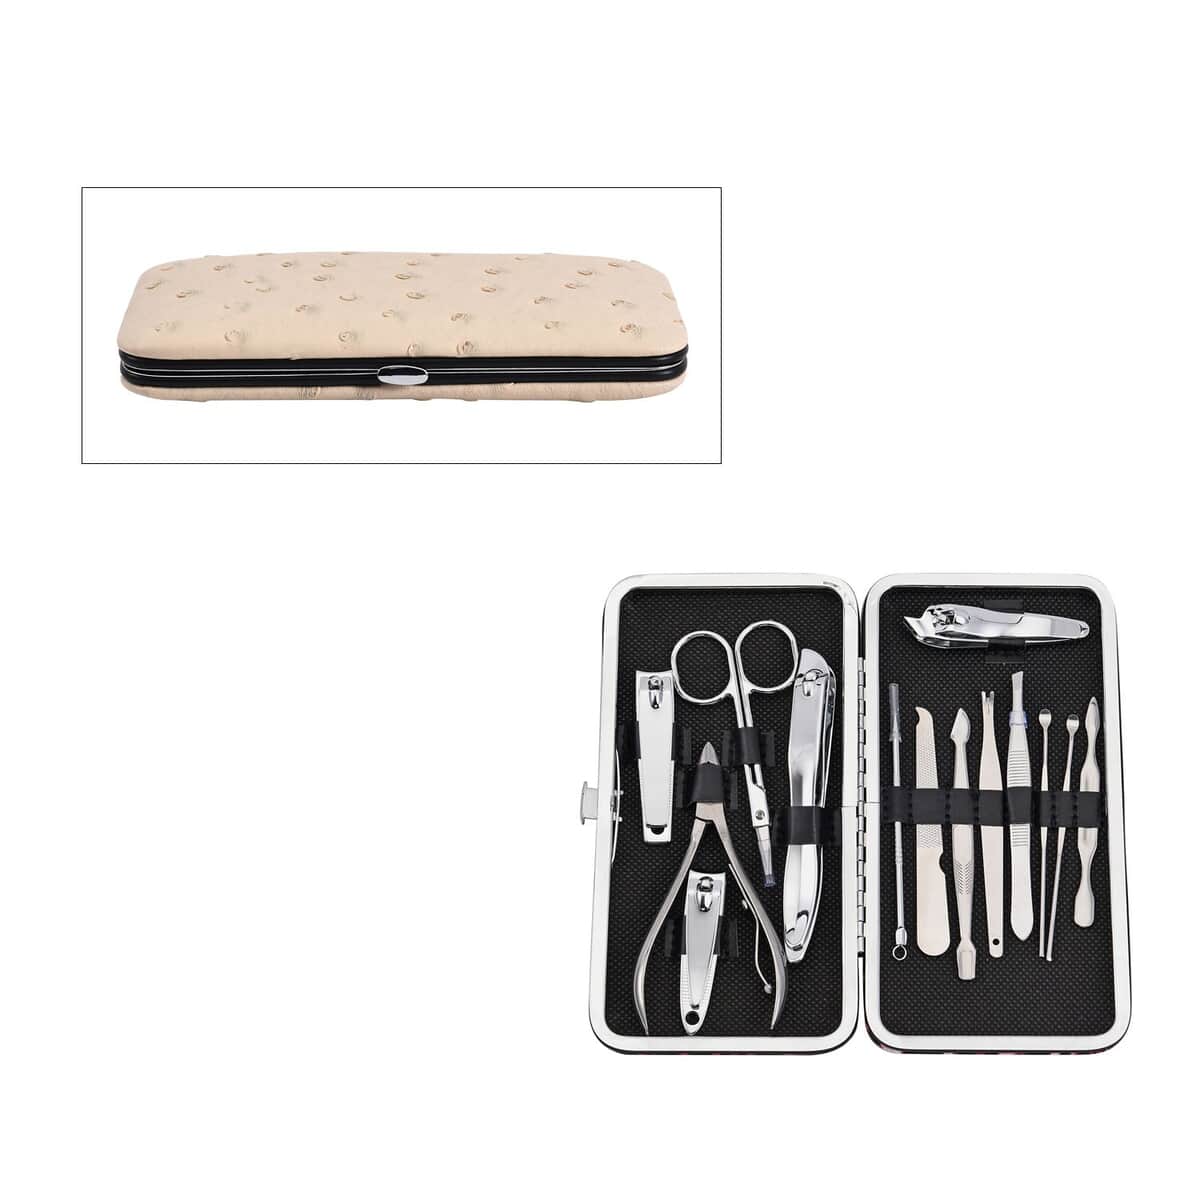 14 Piece Stainless Steel Manicure Grooming Kit in Beige Ostrich Print Faux Leather Case image number 0